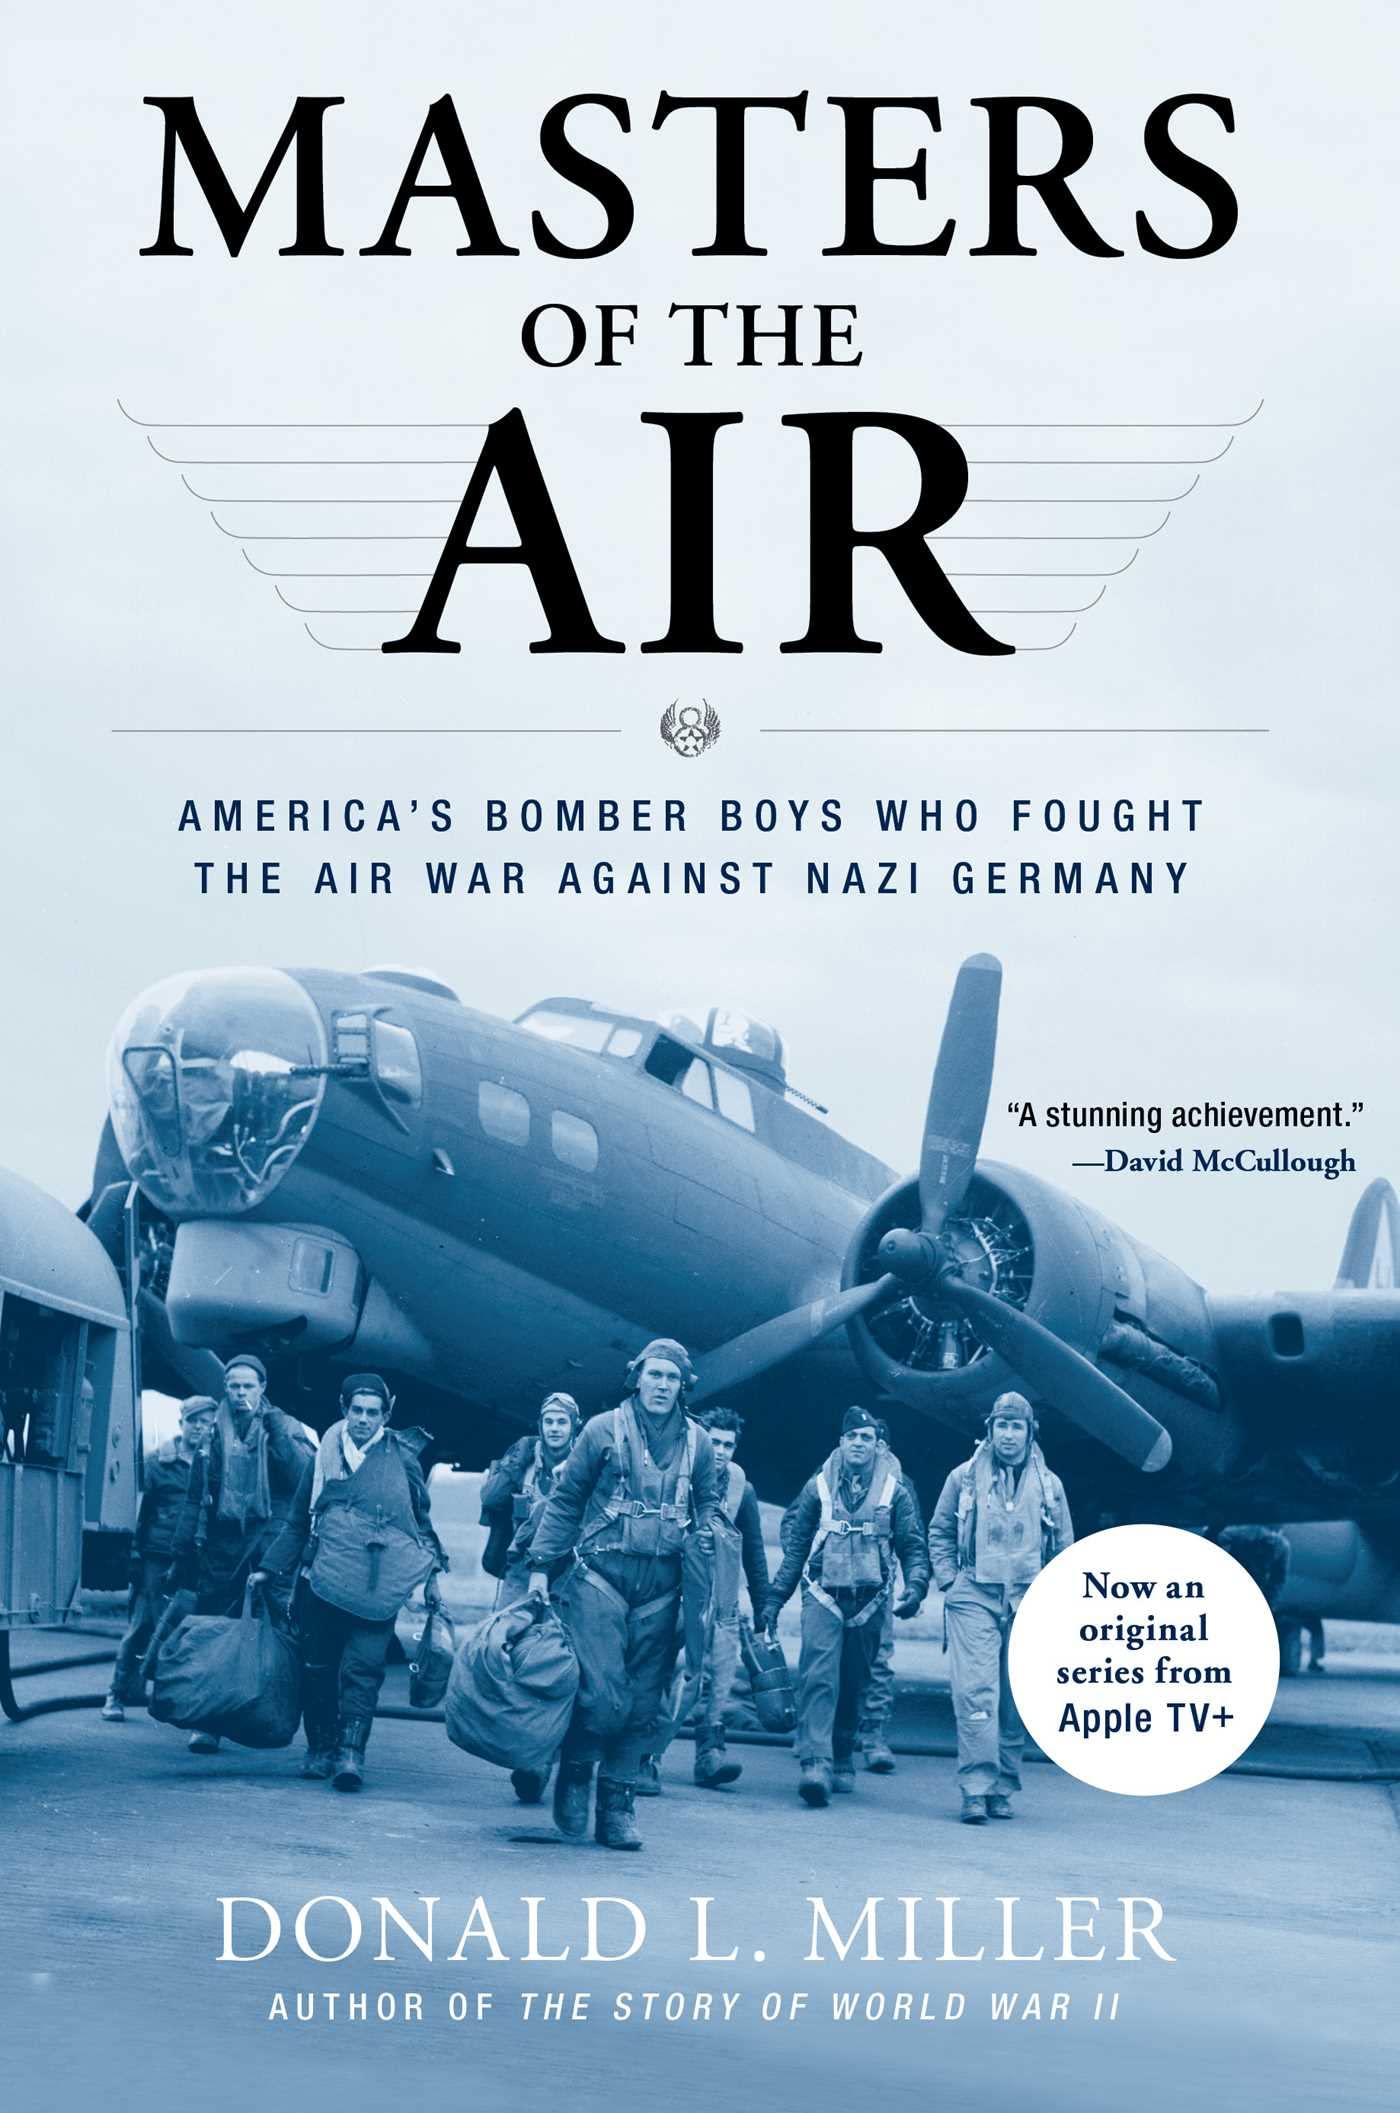 Masters of the Air: America's Bomber Boys Who Fought the Air War Against Nazi Germany $15.18